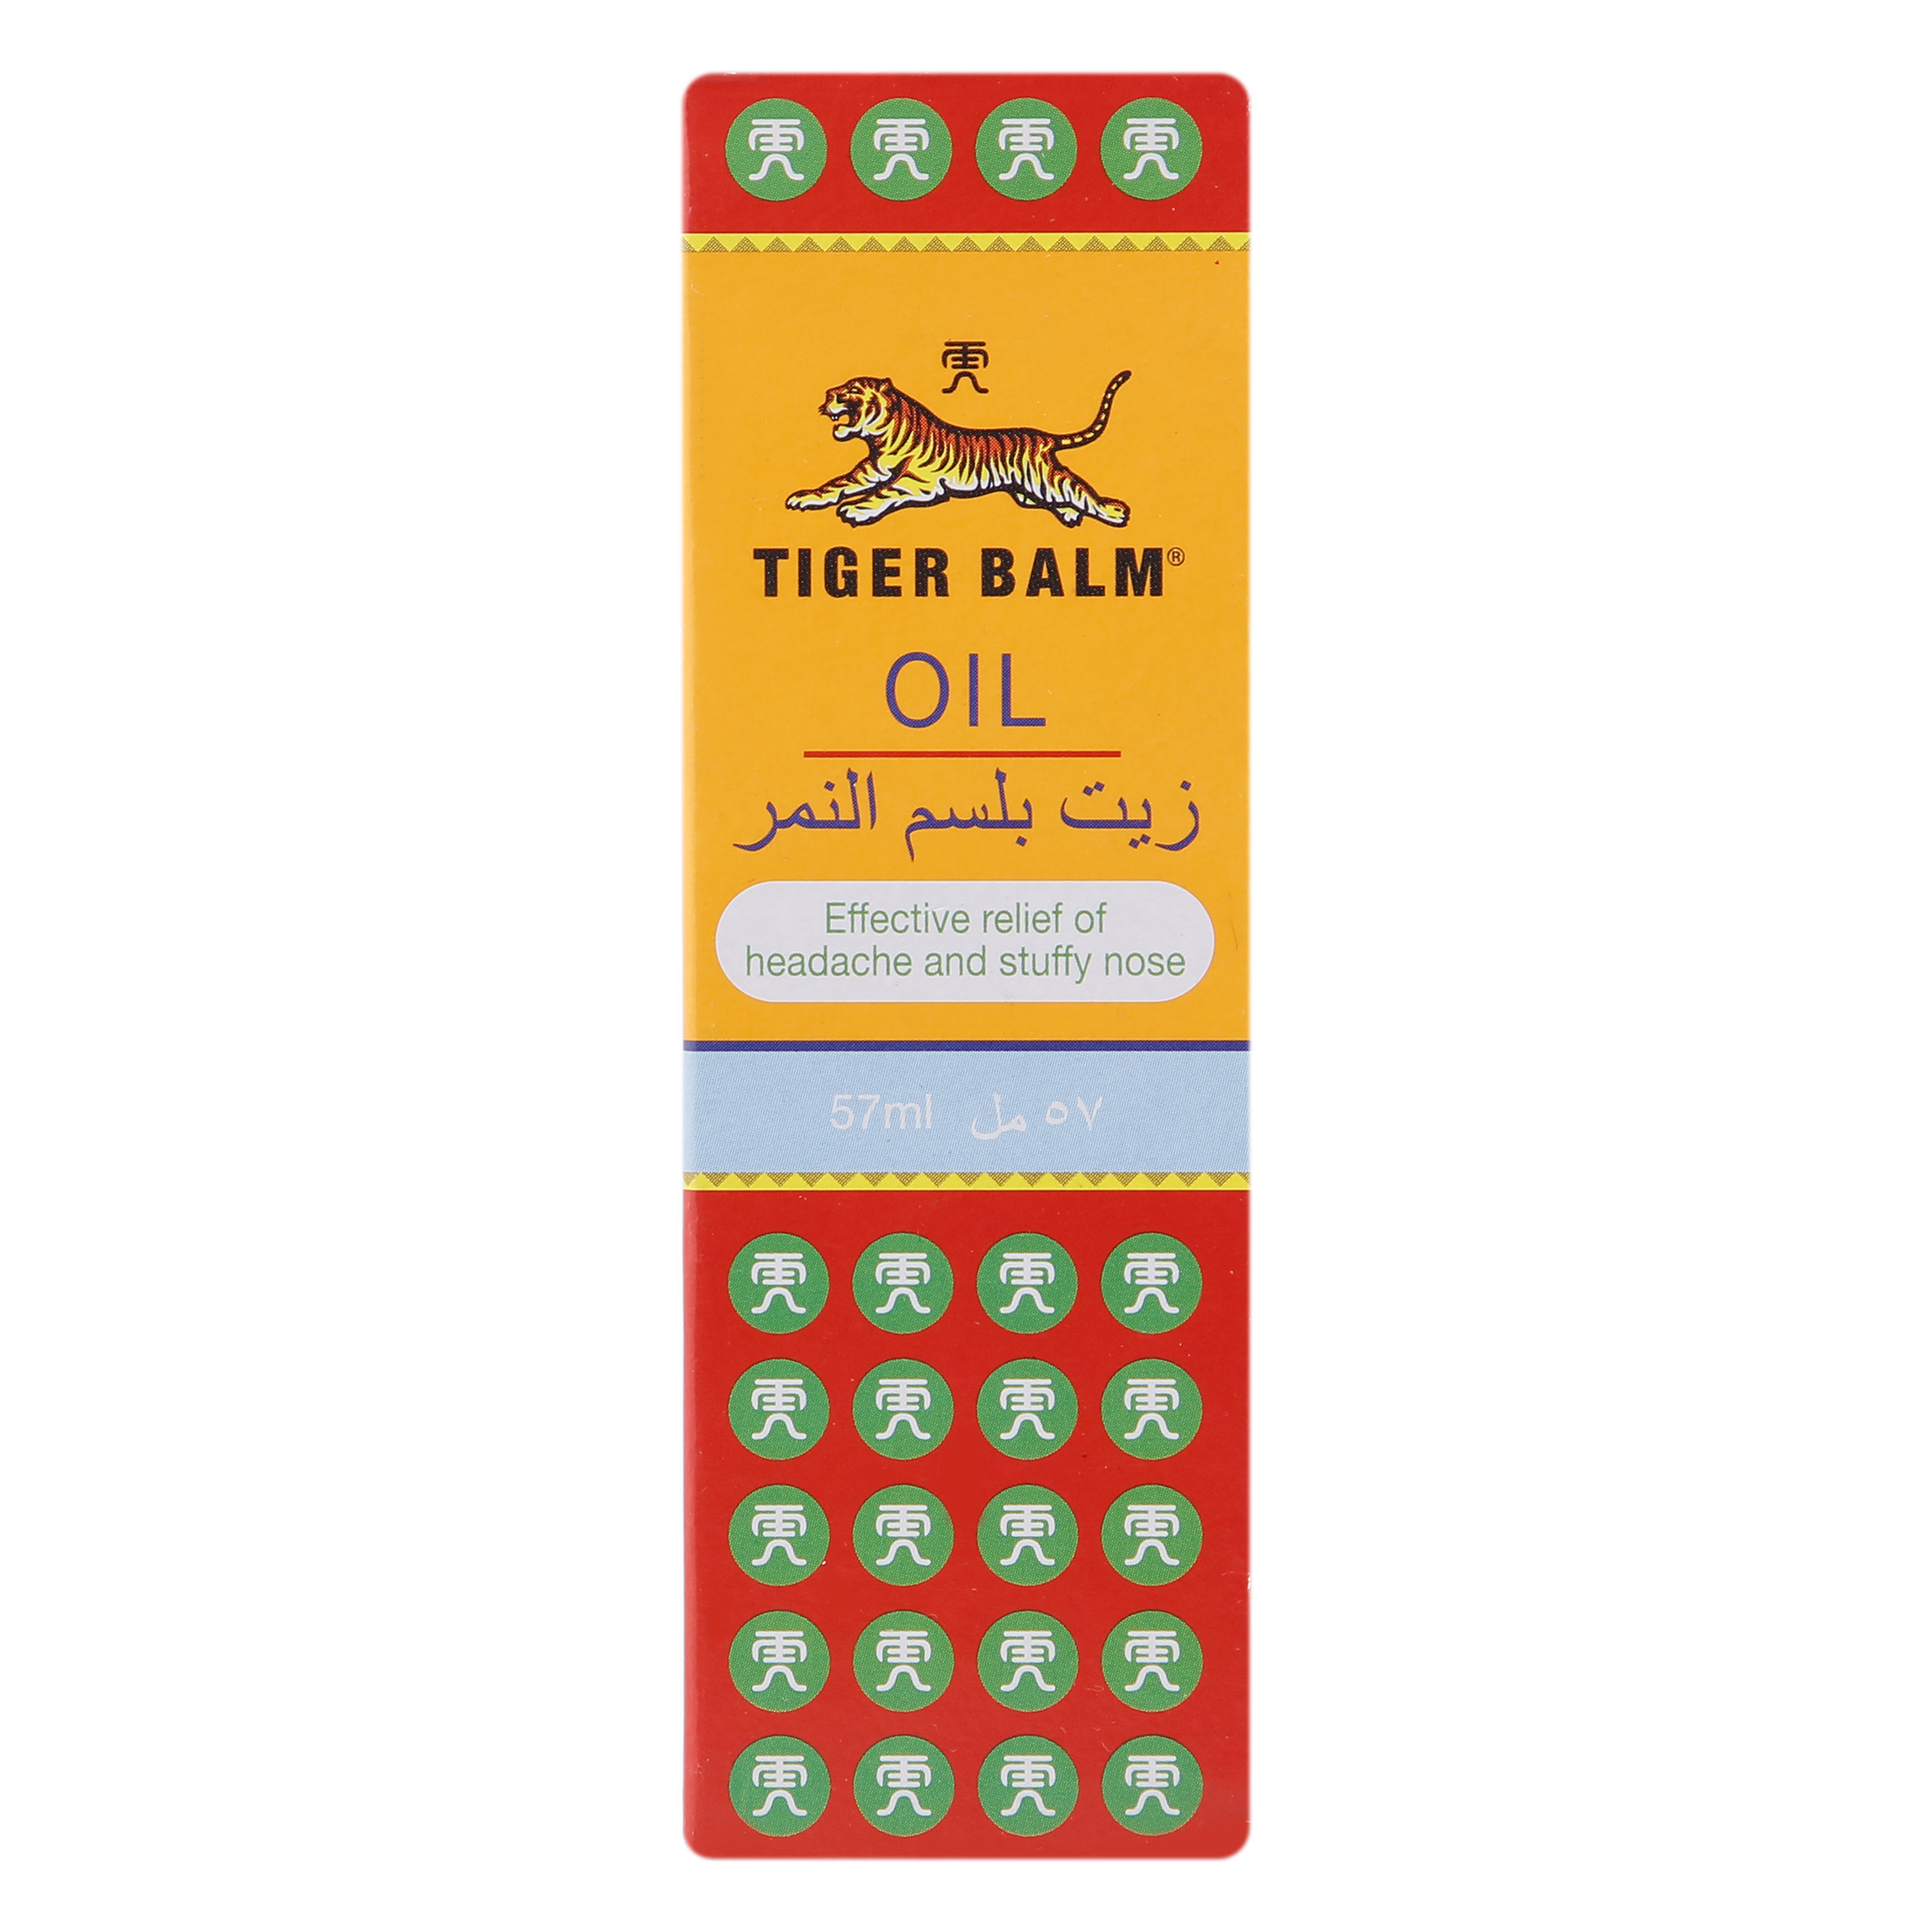 Tiger Balm Oil Effective Relief Of Headache And Stuffy Nose (57 ml) Tiger Balm